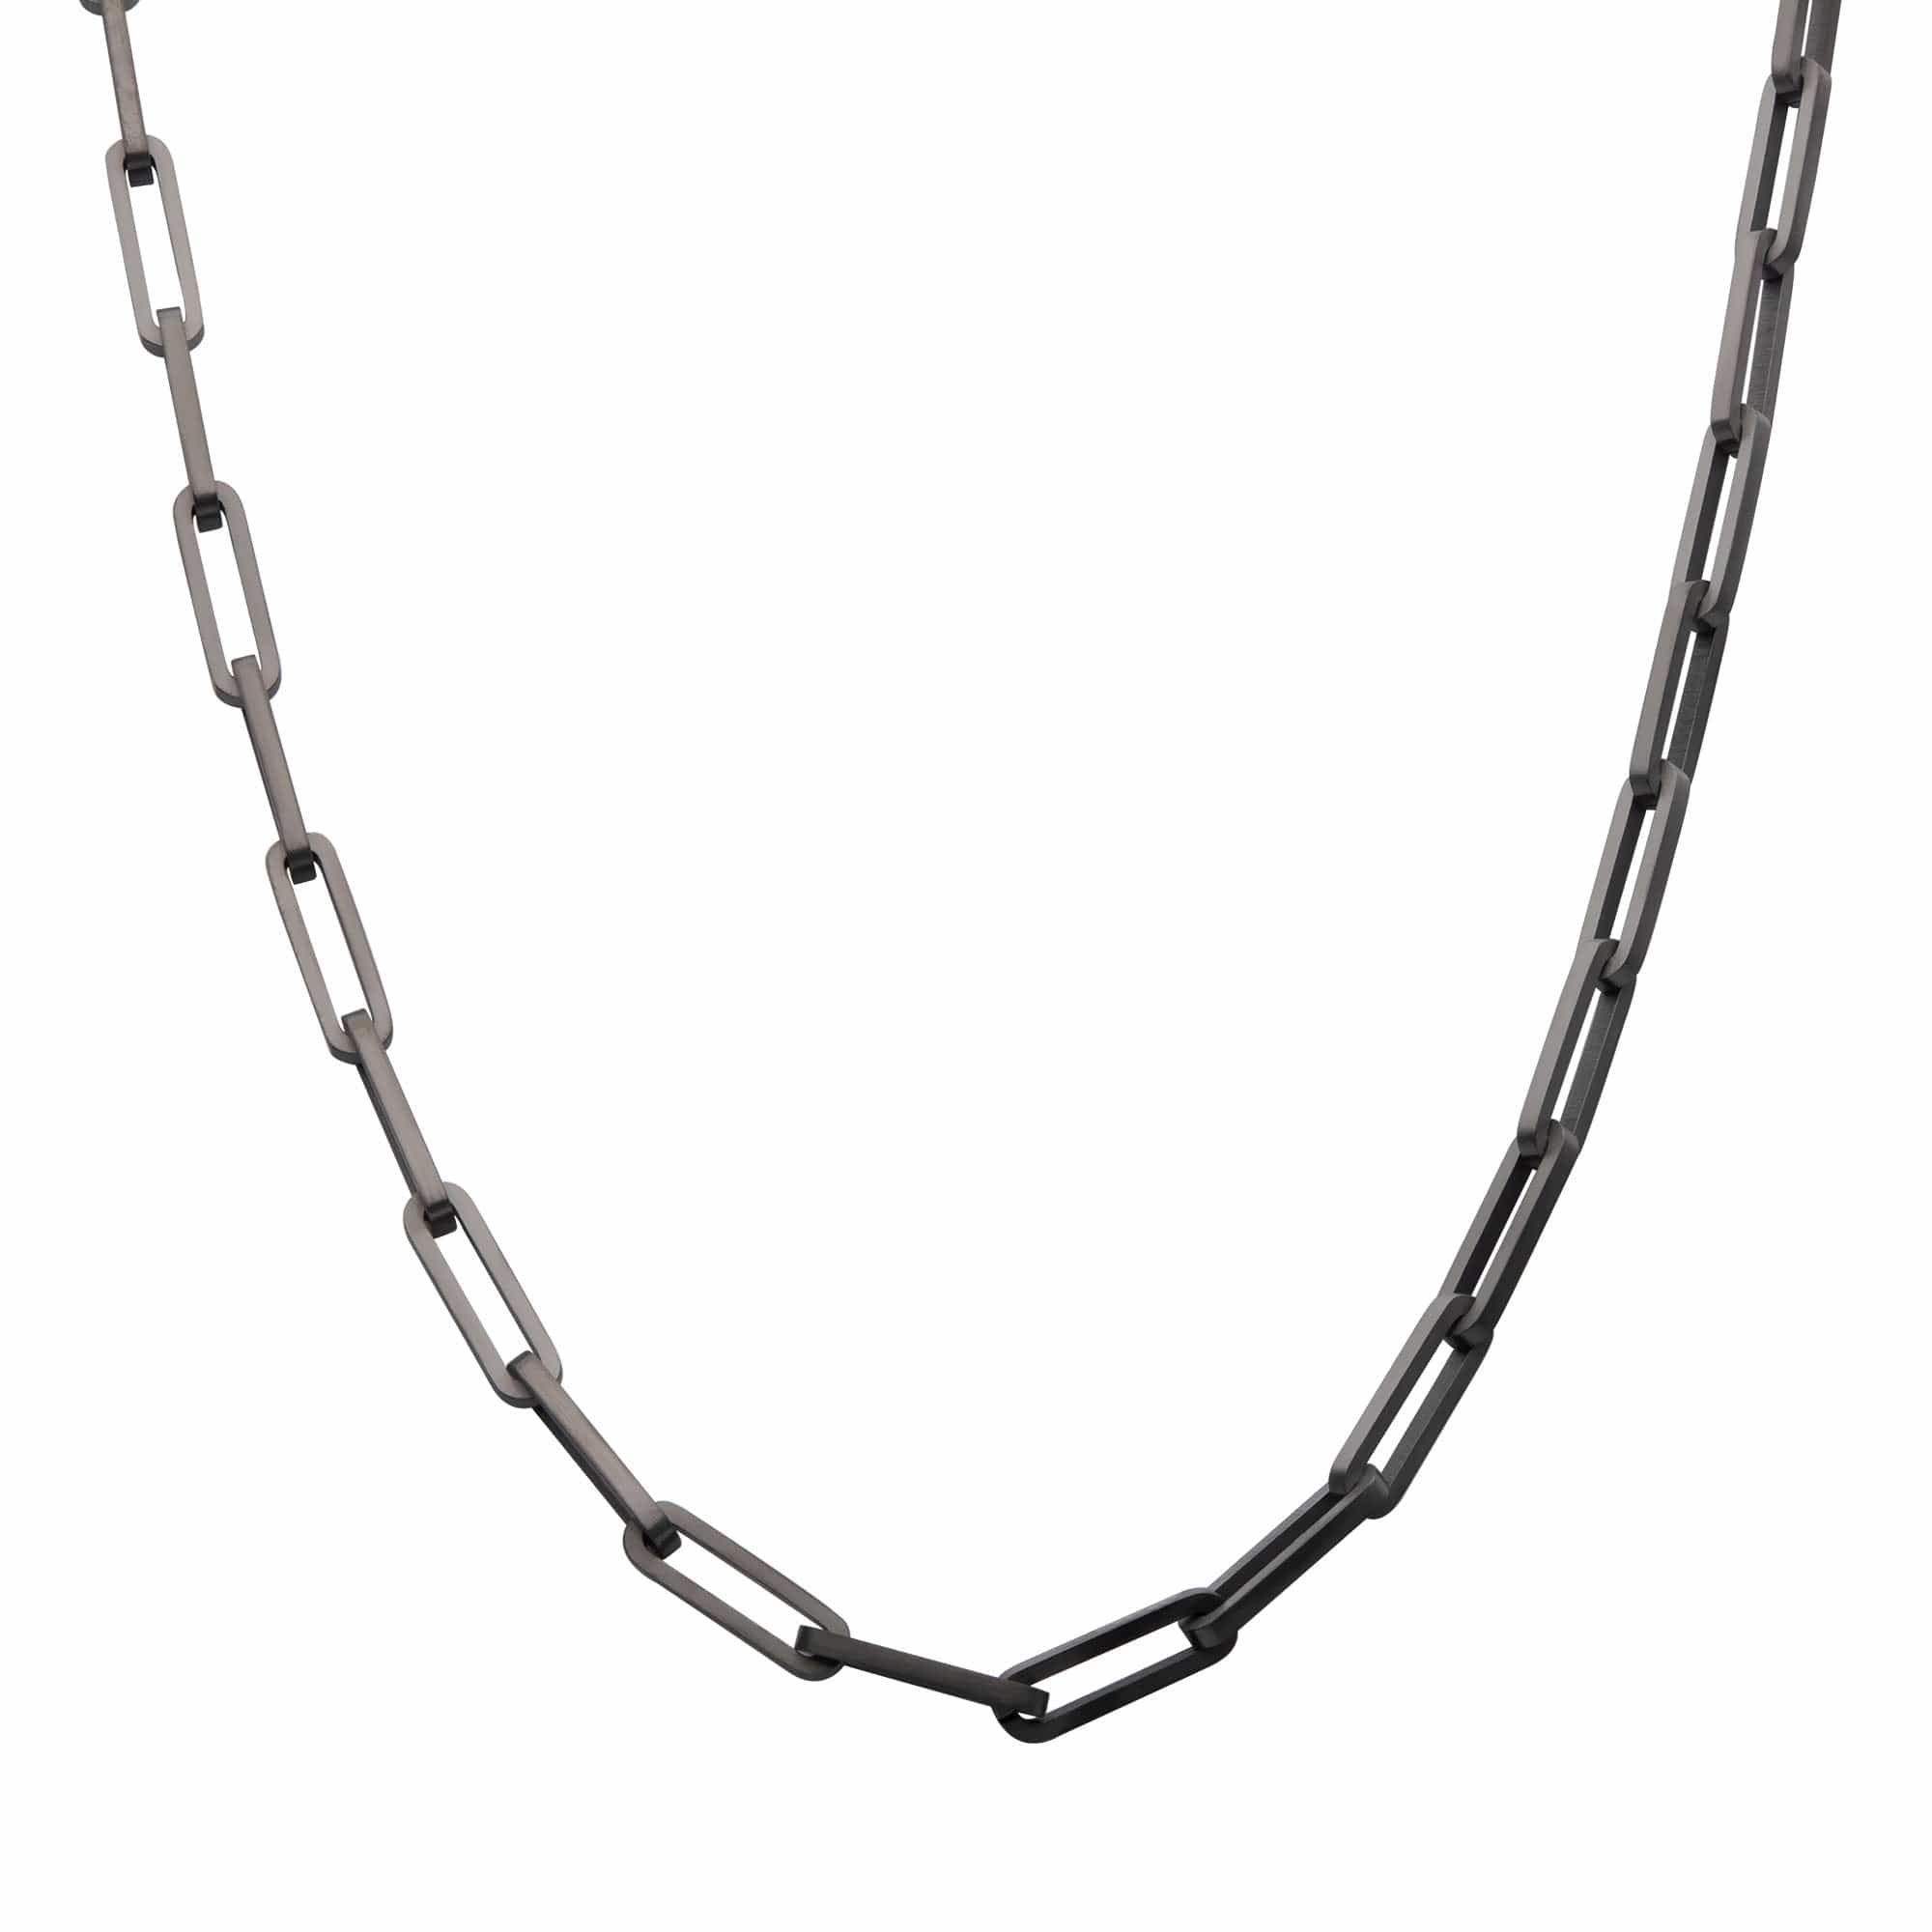 INOX JEWELRY Chains Gunmetal Silver Tone Stainless Steel 6mm Paperclip Link Chain